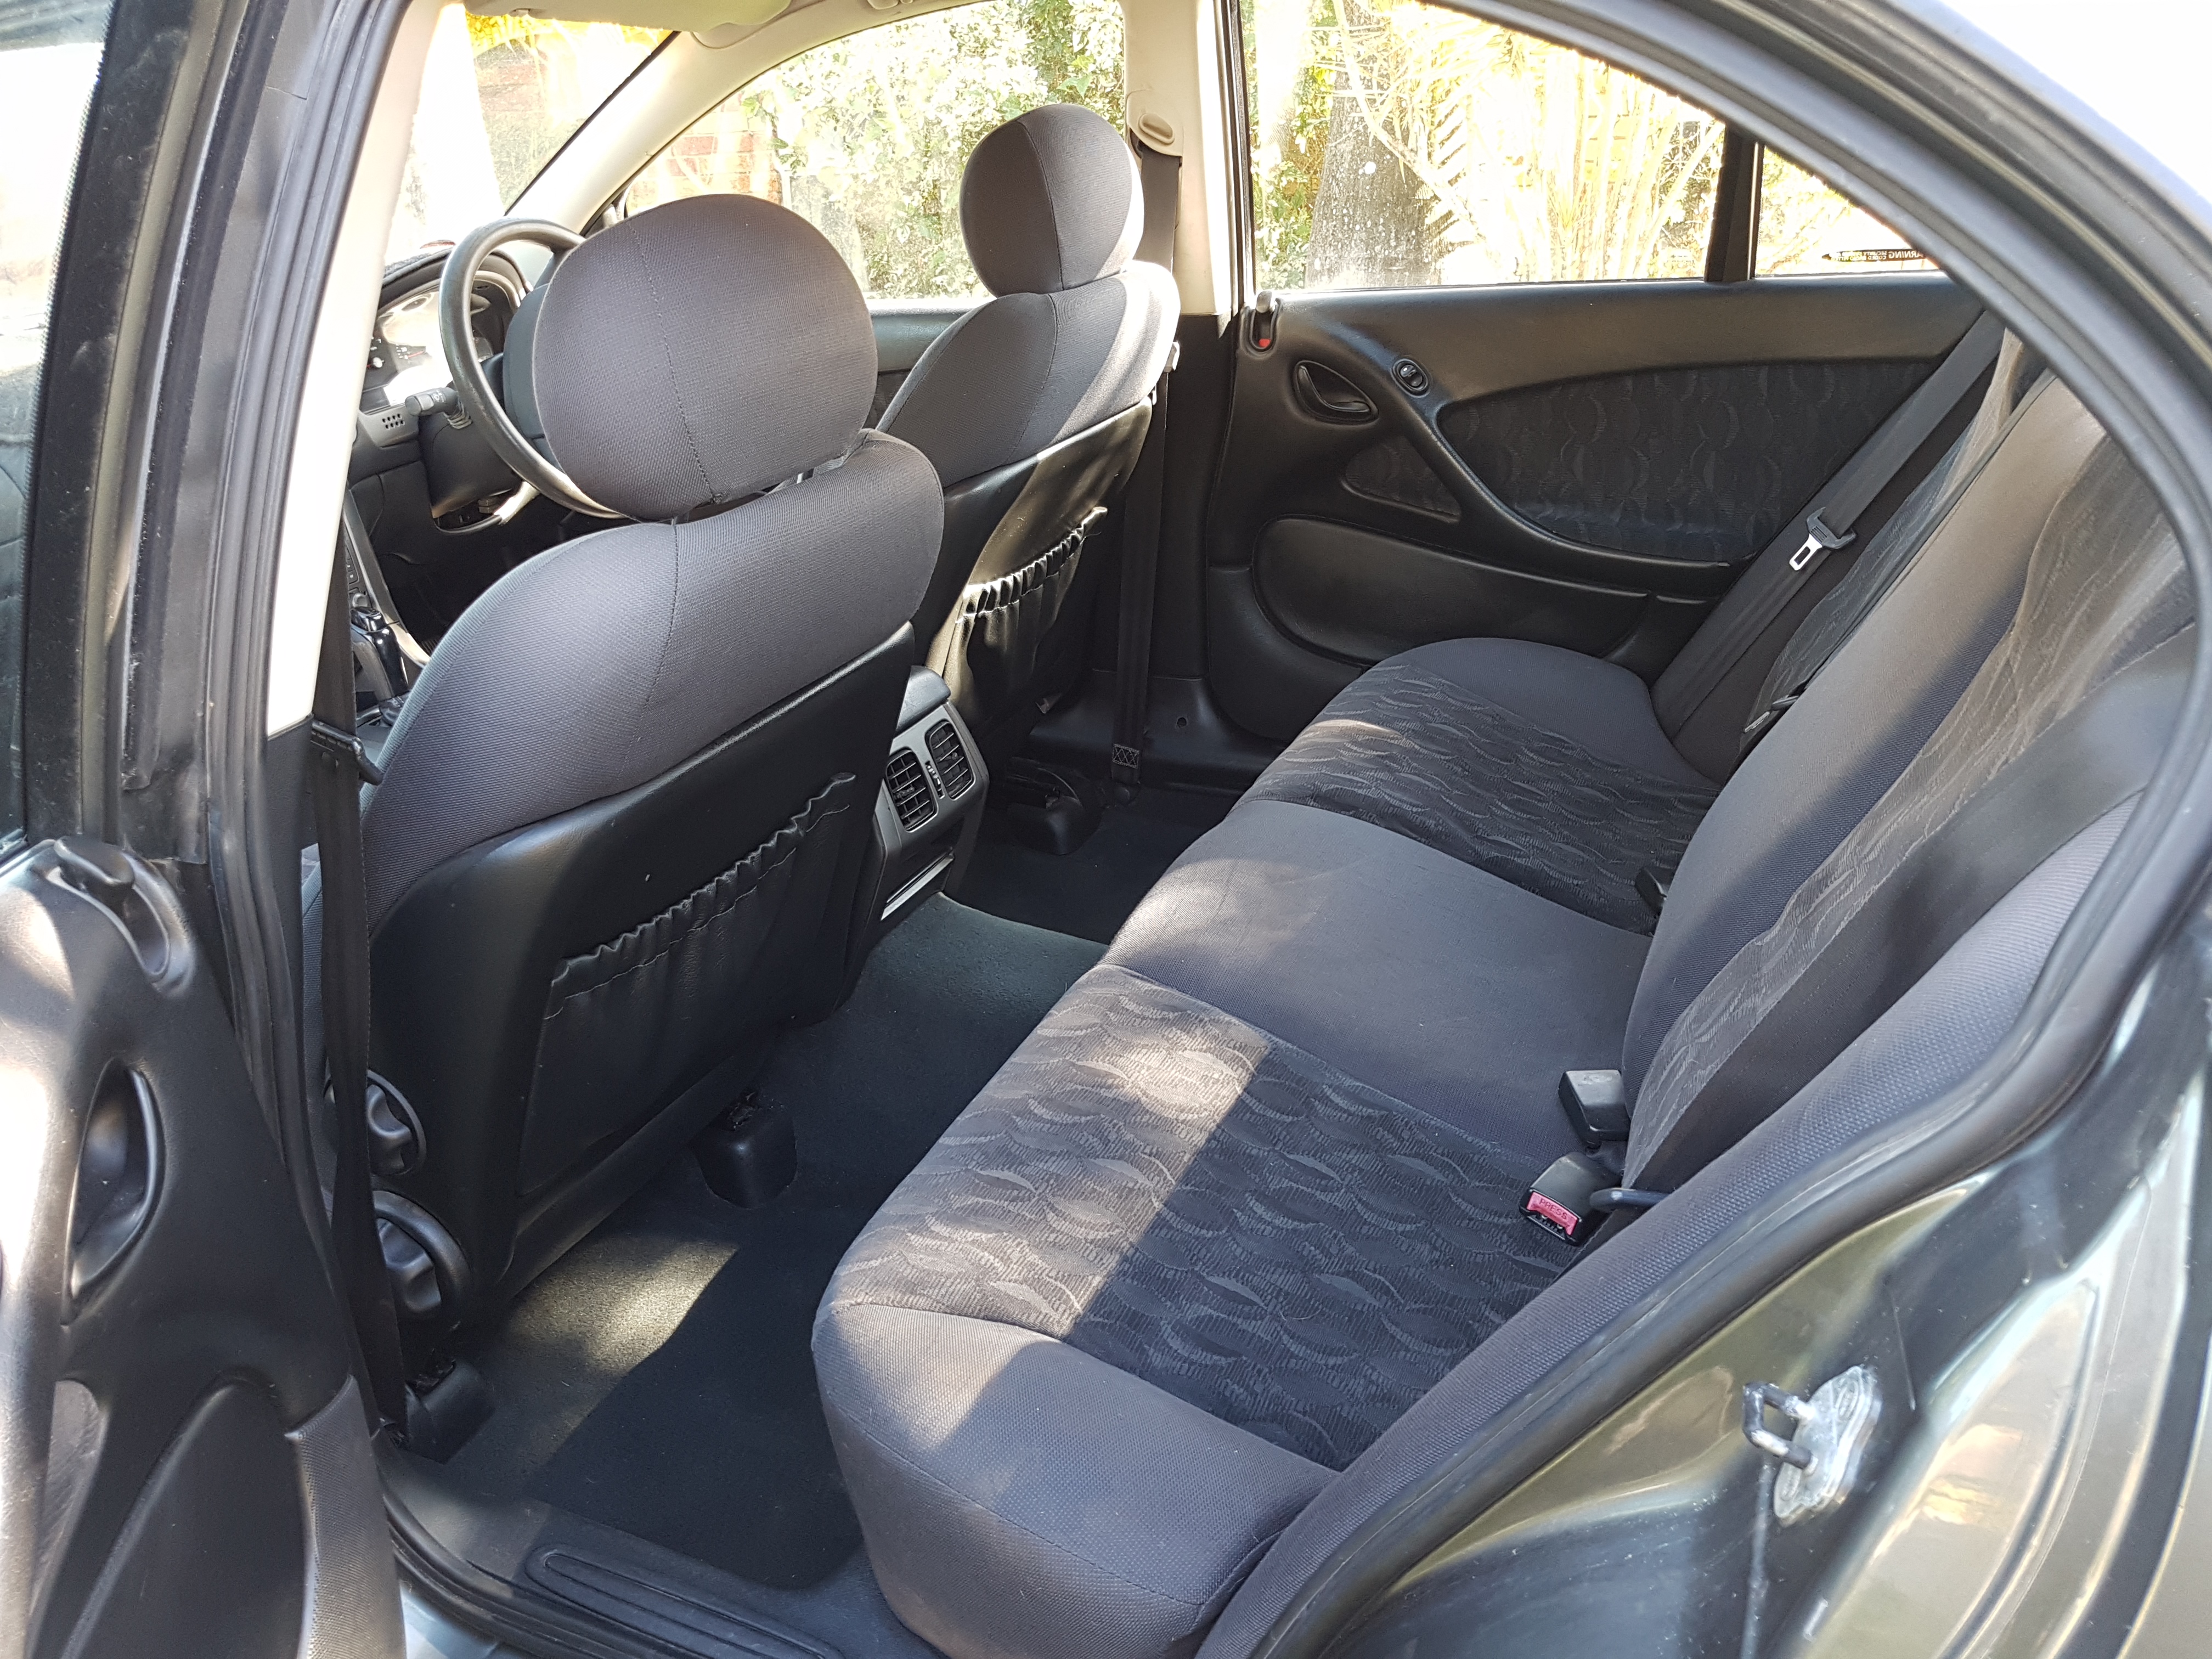 2004 Holden Commodore Acclaim VY